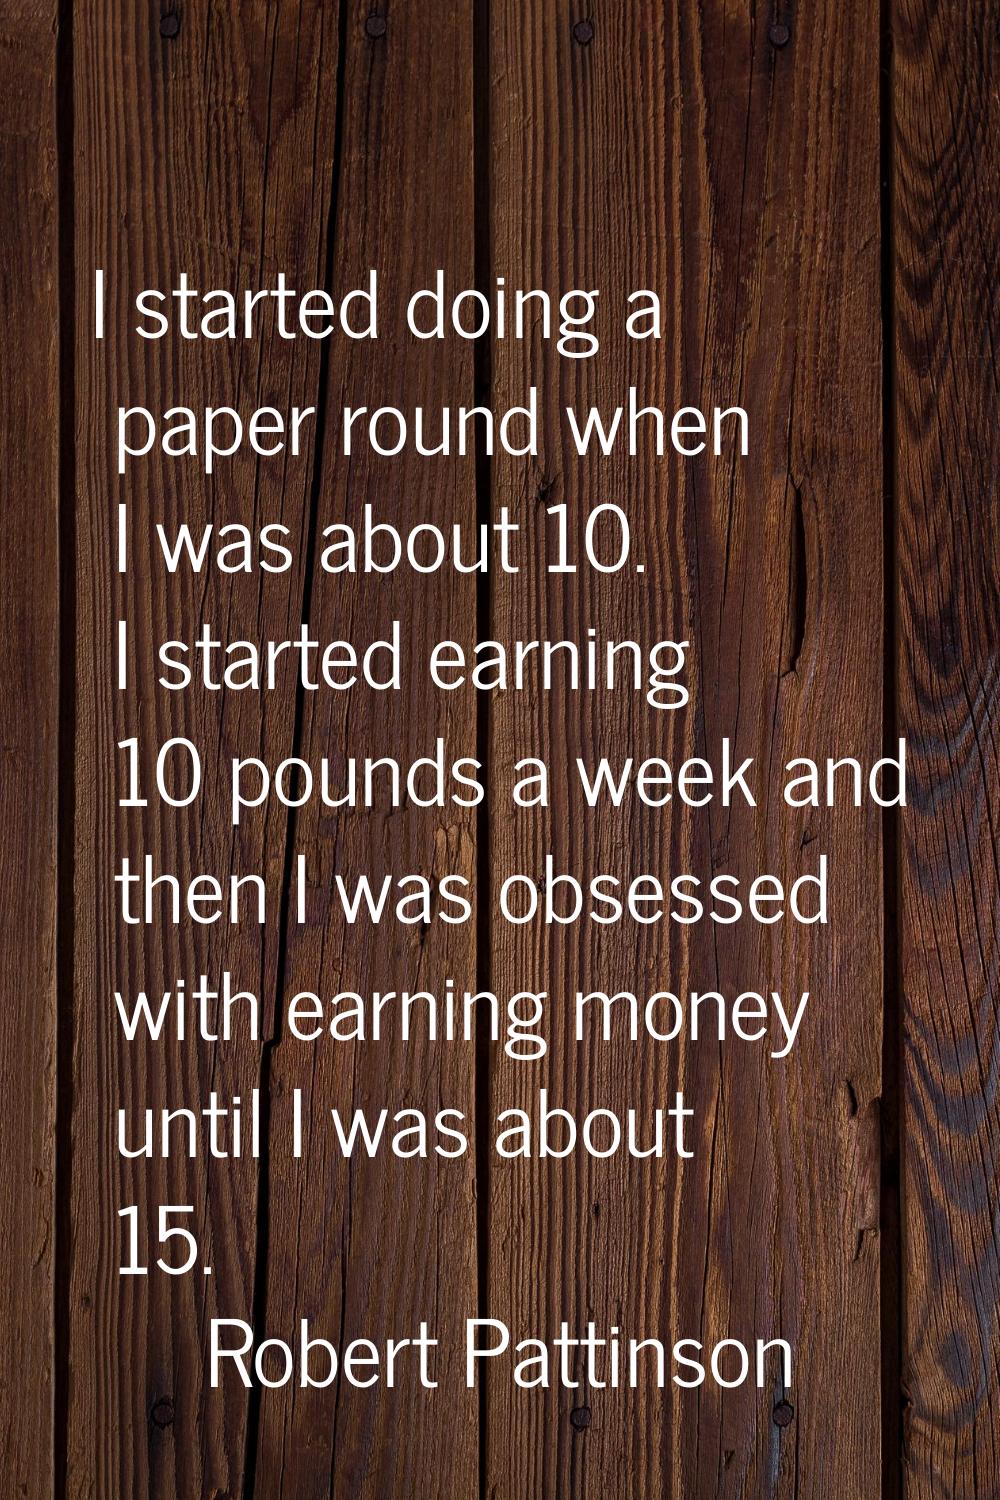 I started doing a paper round when I was about 10. I started earning 10 pounds a week and then I wa